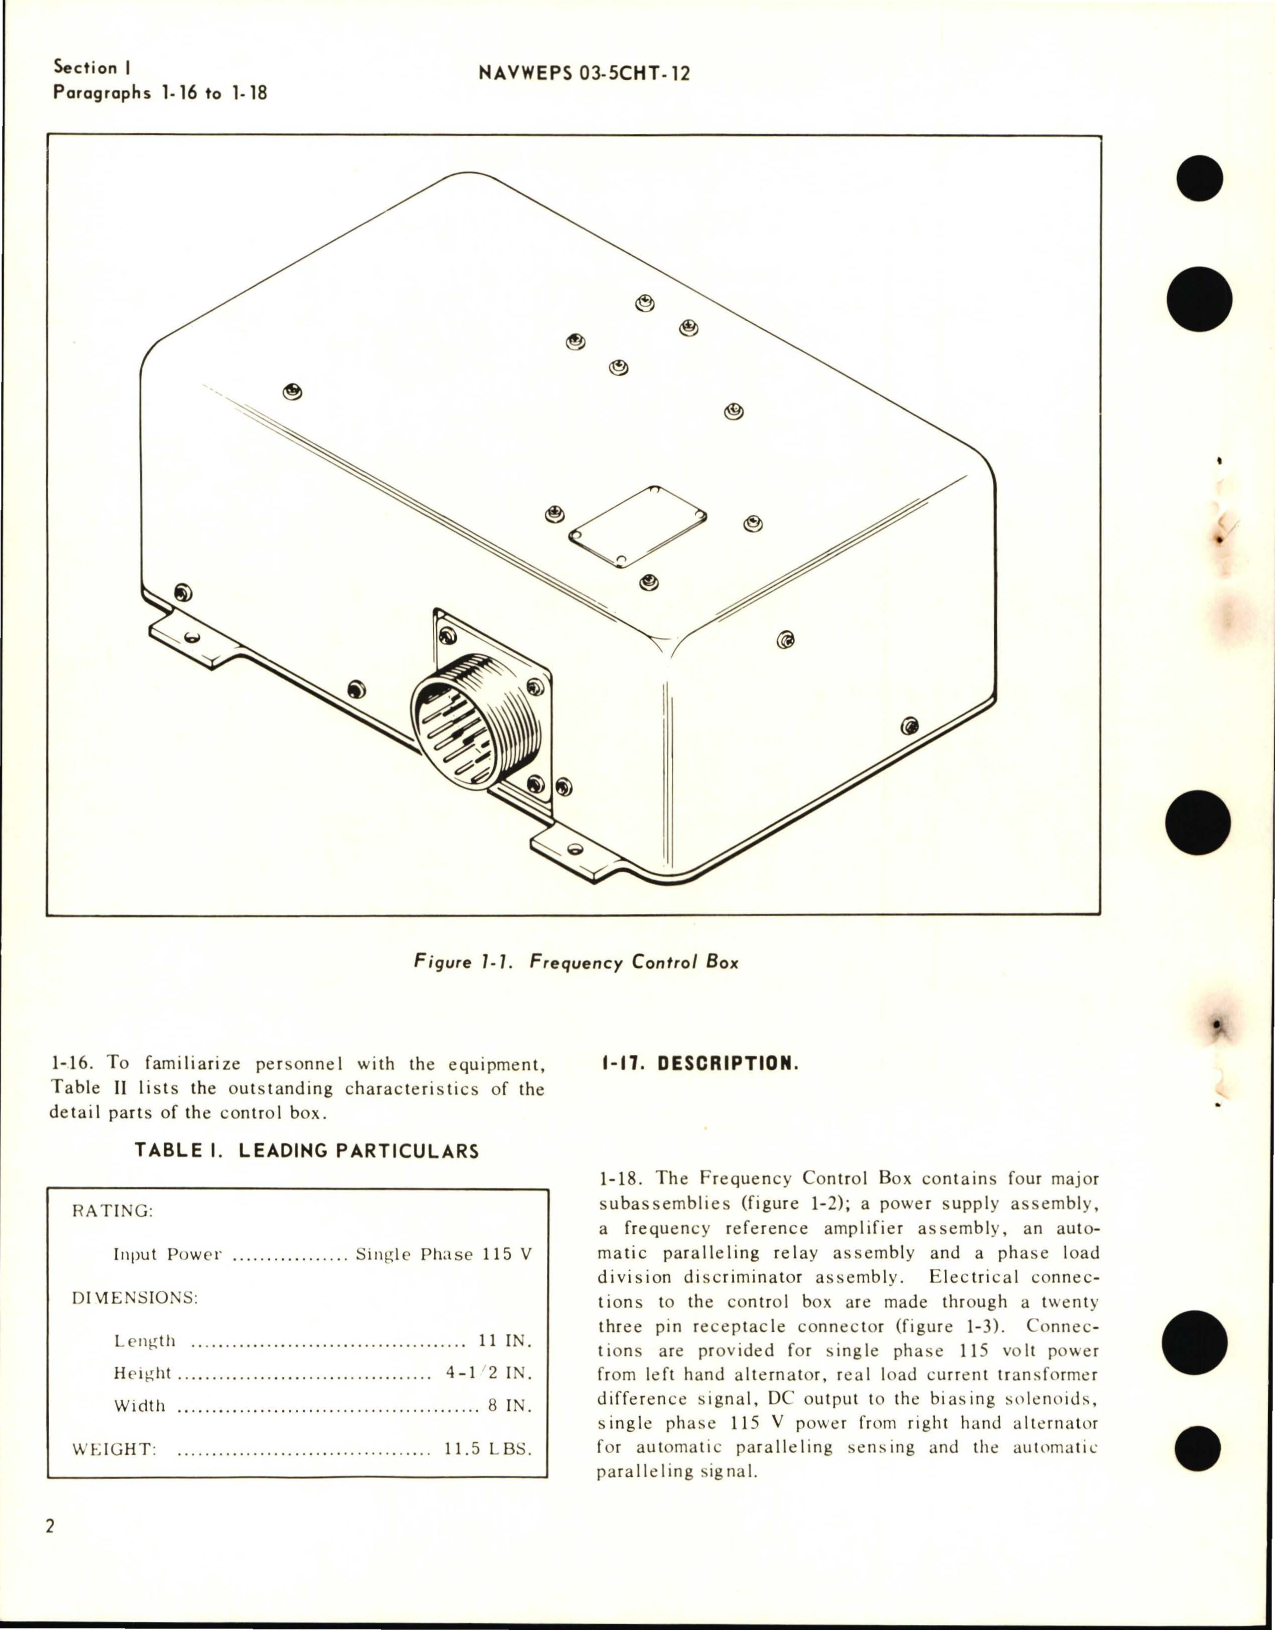 Sample page 6 from AirCorps Library document: Operation and Service Instructions for Frequency Control Box for 538D888P1